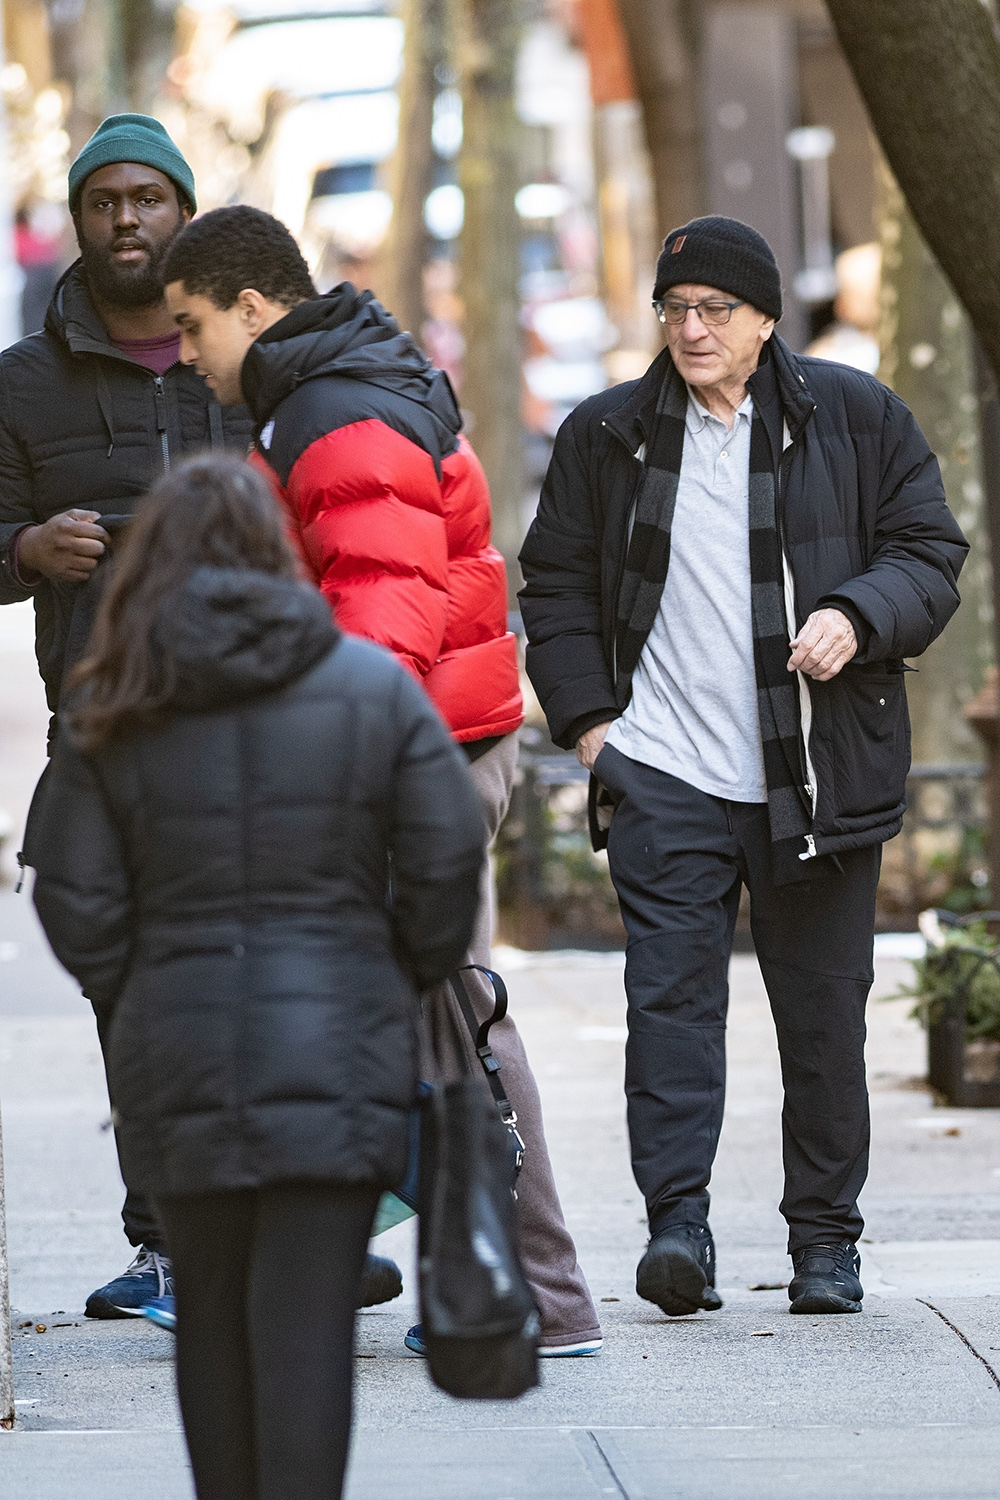 <p>Robert De Niro And Elliot De Niro were seen out and about in New York City on March 17, 2023. They both were black coats to keep themselves warm in the chilly winter air. Elliot is the actor’s son from his second marriage to actress and philanthropist Grace Hightower.</p>